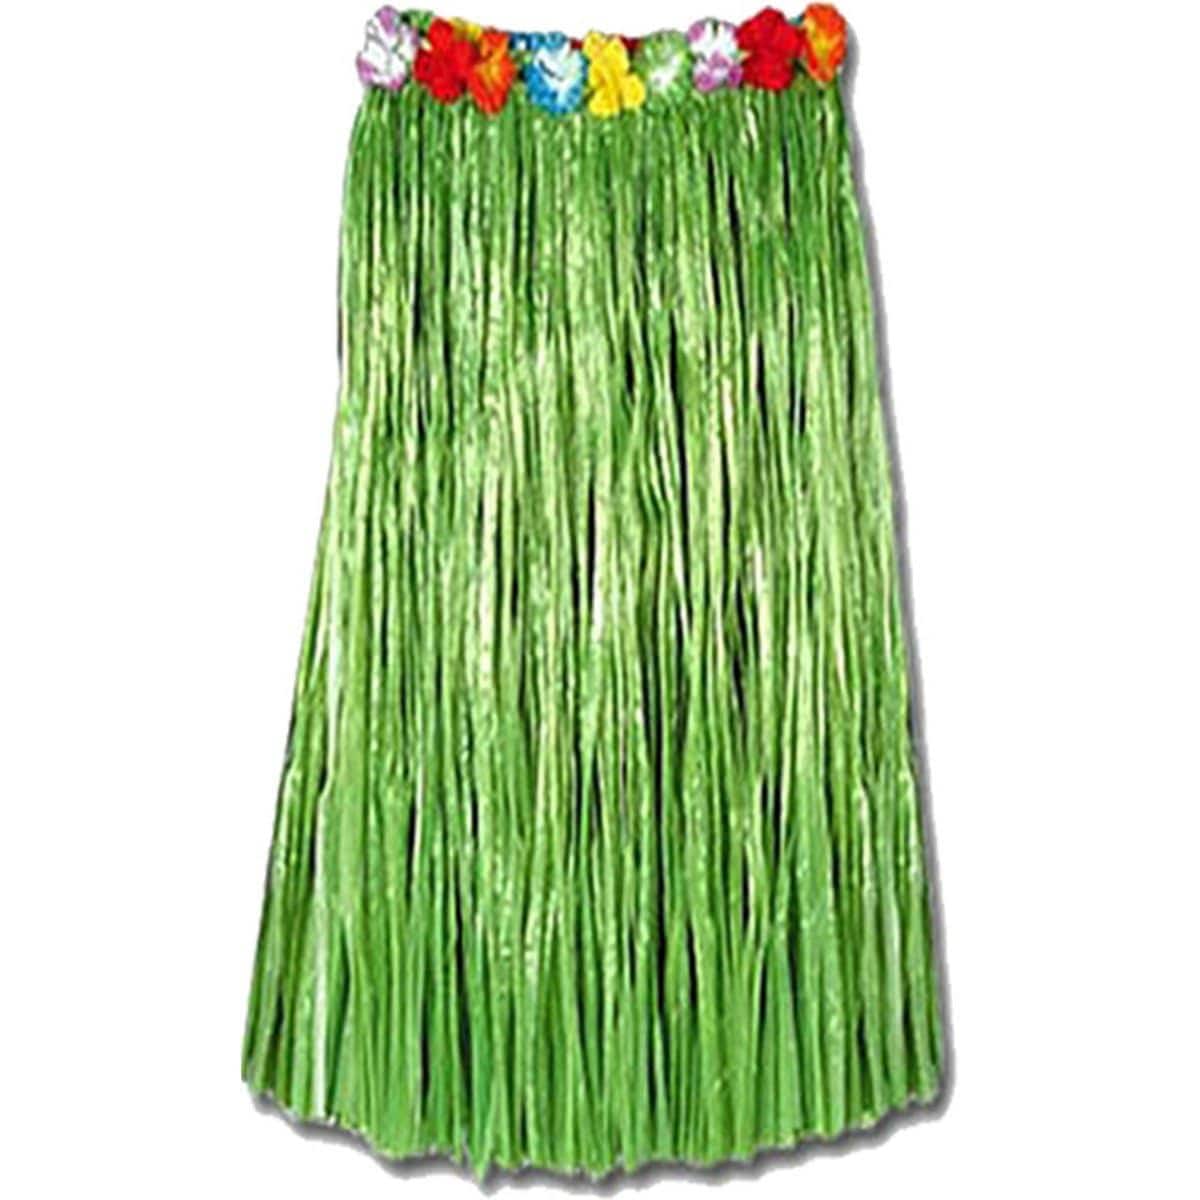 Buy Theme Party Green Raffia Flowered Hawaiian Skirt for Adults sold at Party Expert